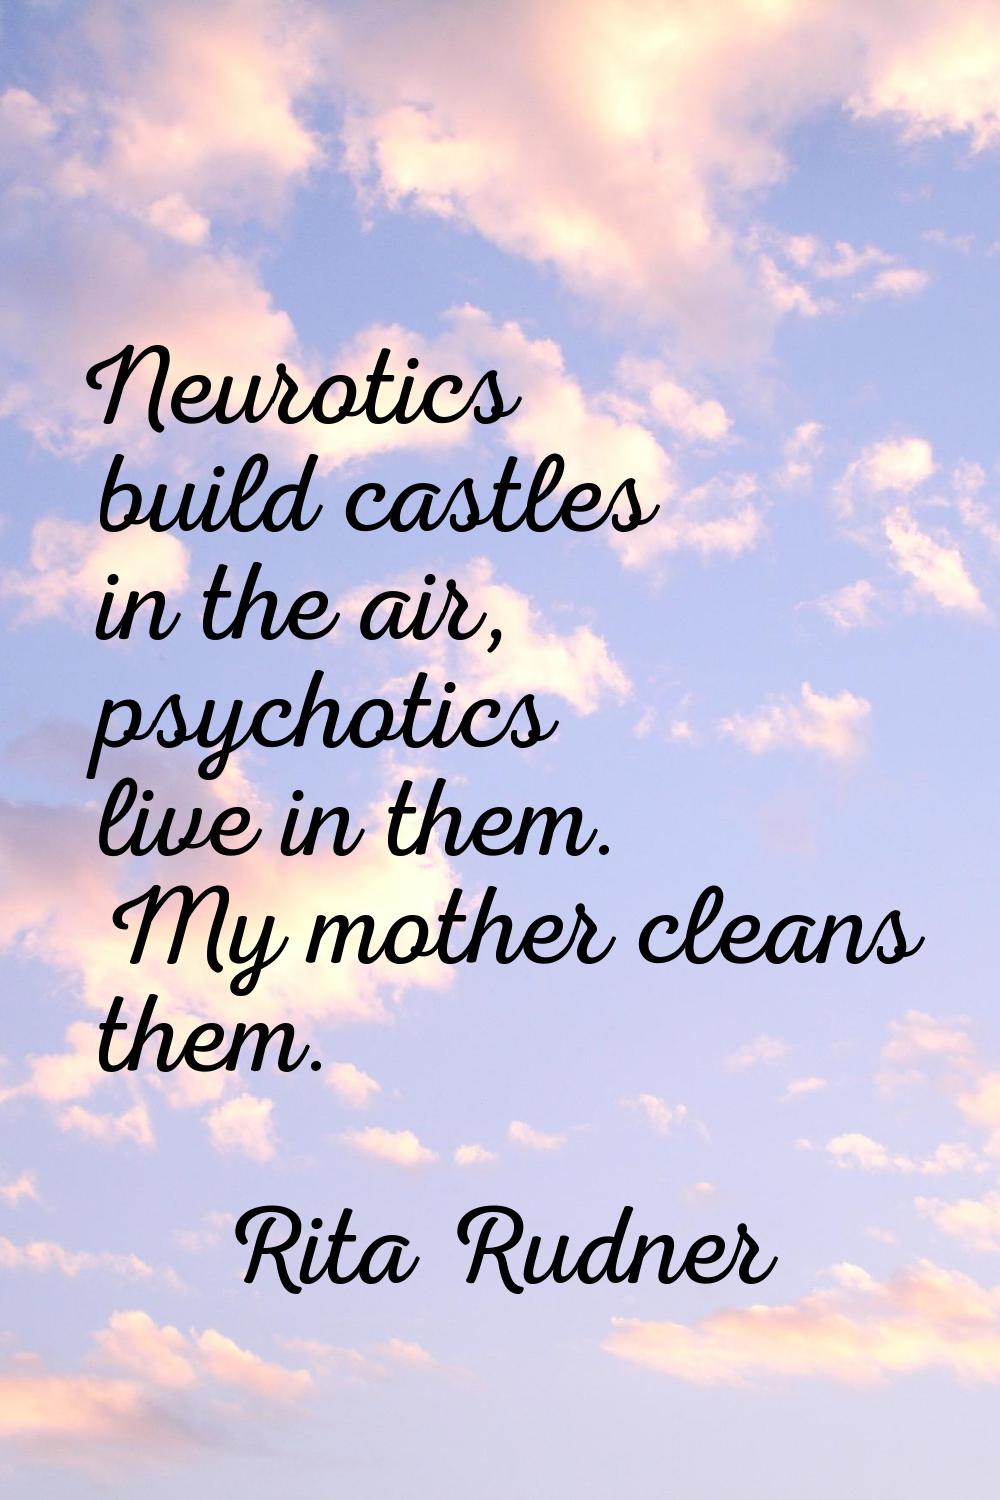 Neurotics build castles in the air, psychotics live in them. My mother cleans them.